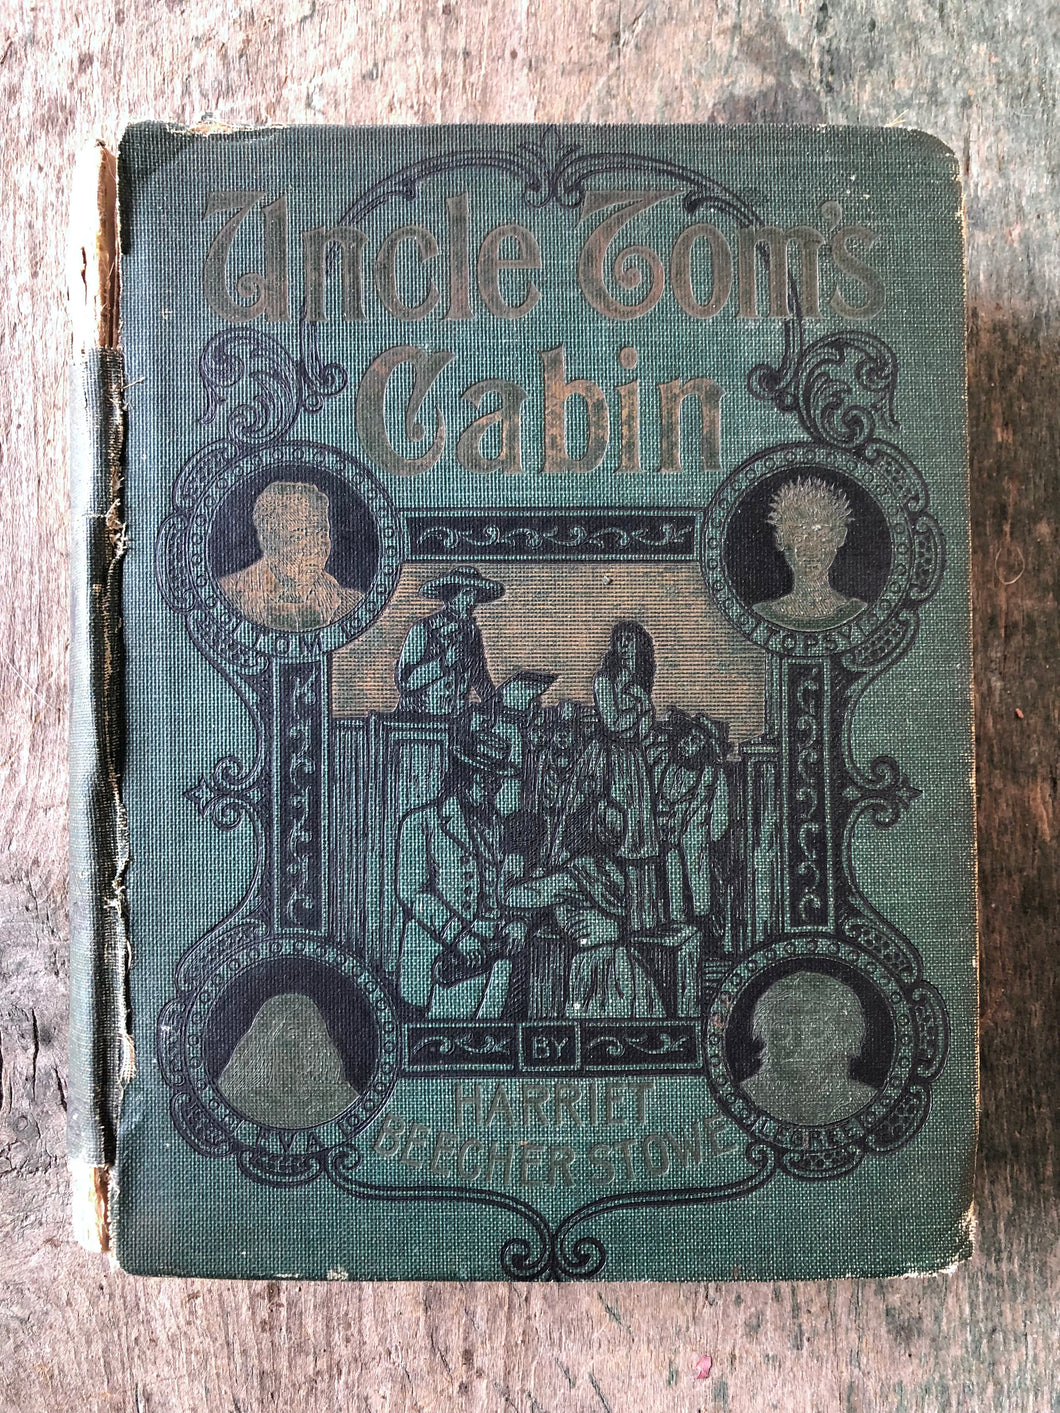 Uncle Tom's Cabin or Life Among the Lowly by Harriet Beecher Stowe. Art Memorial Edition.